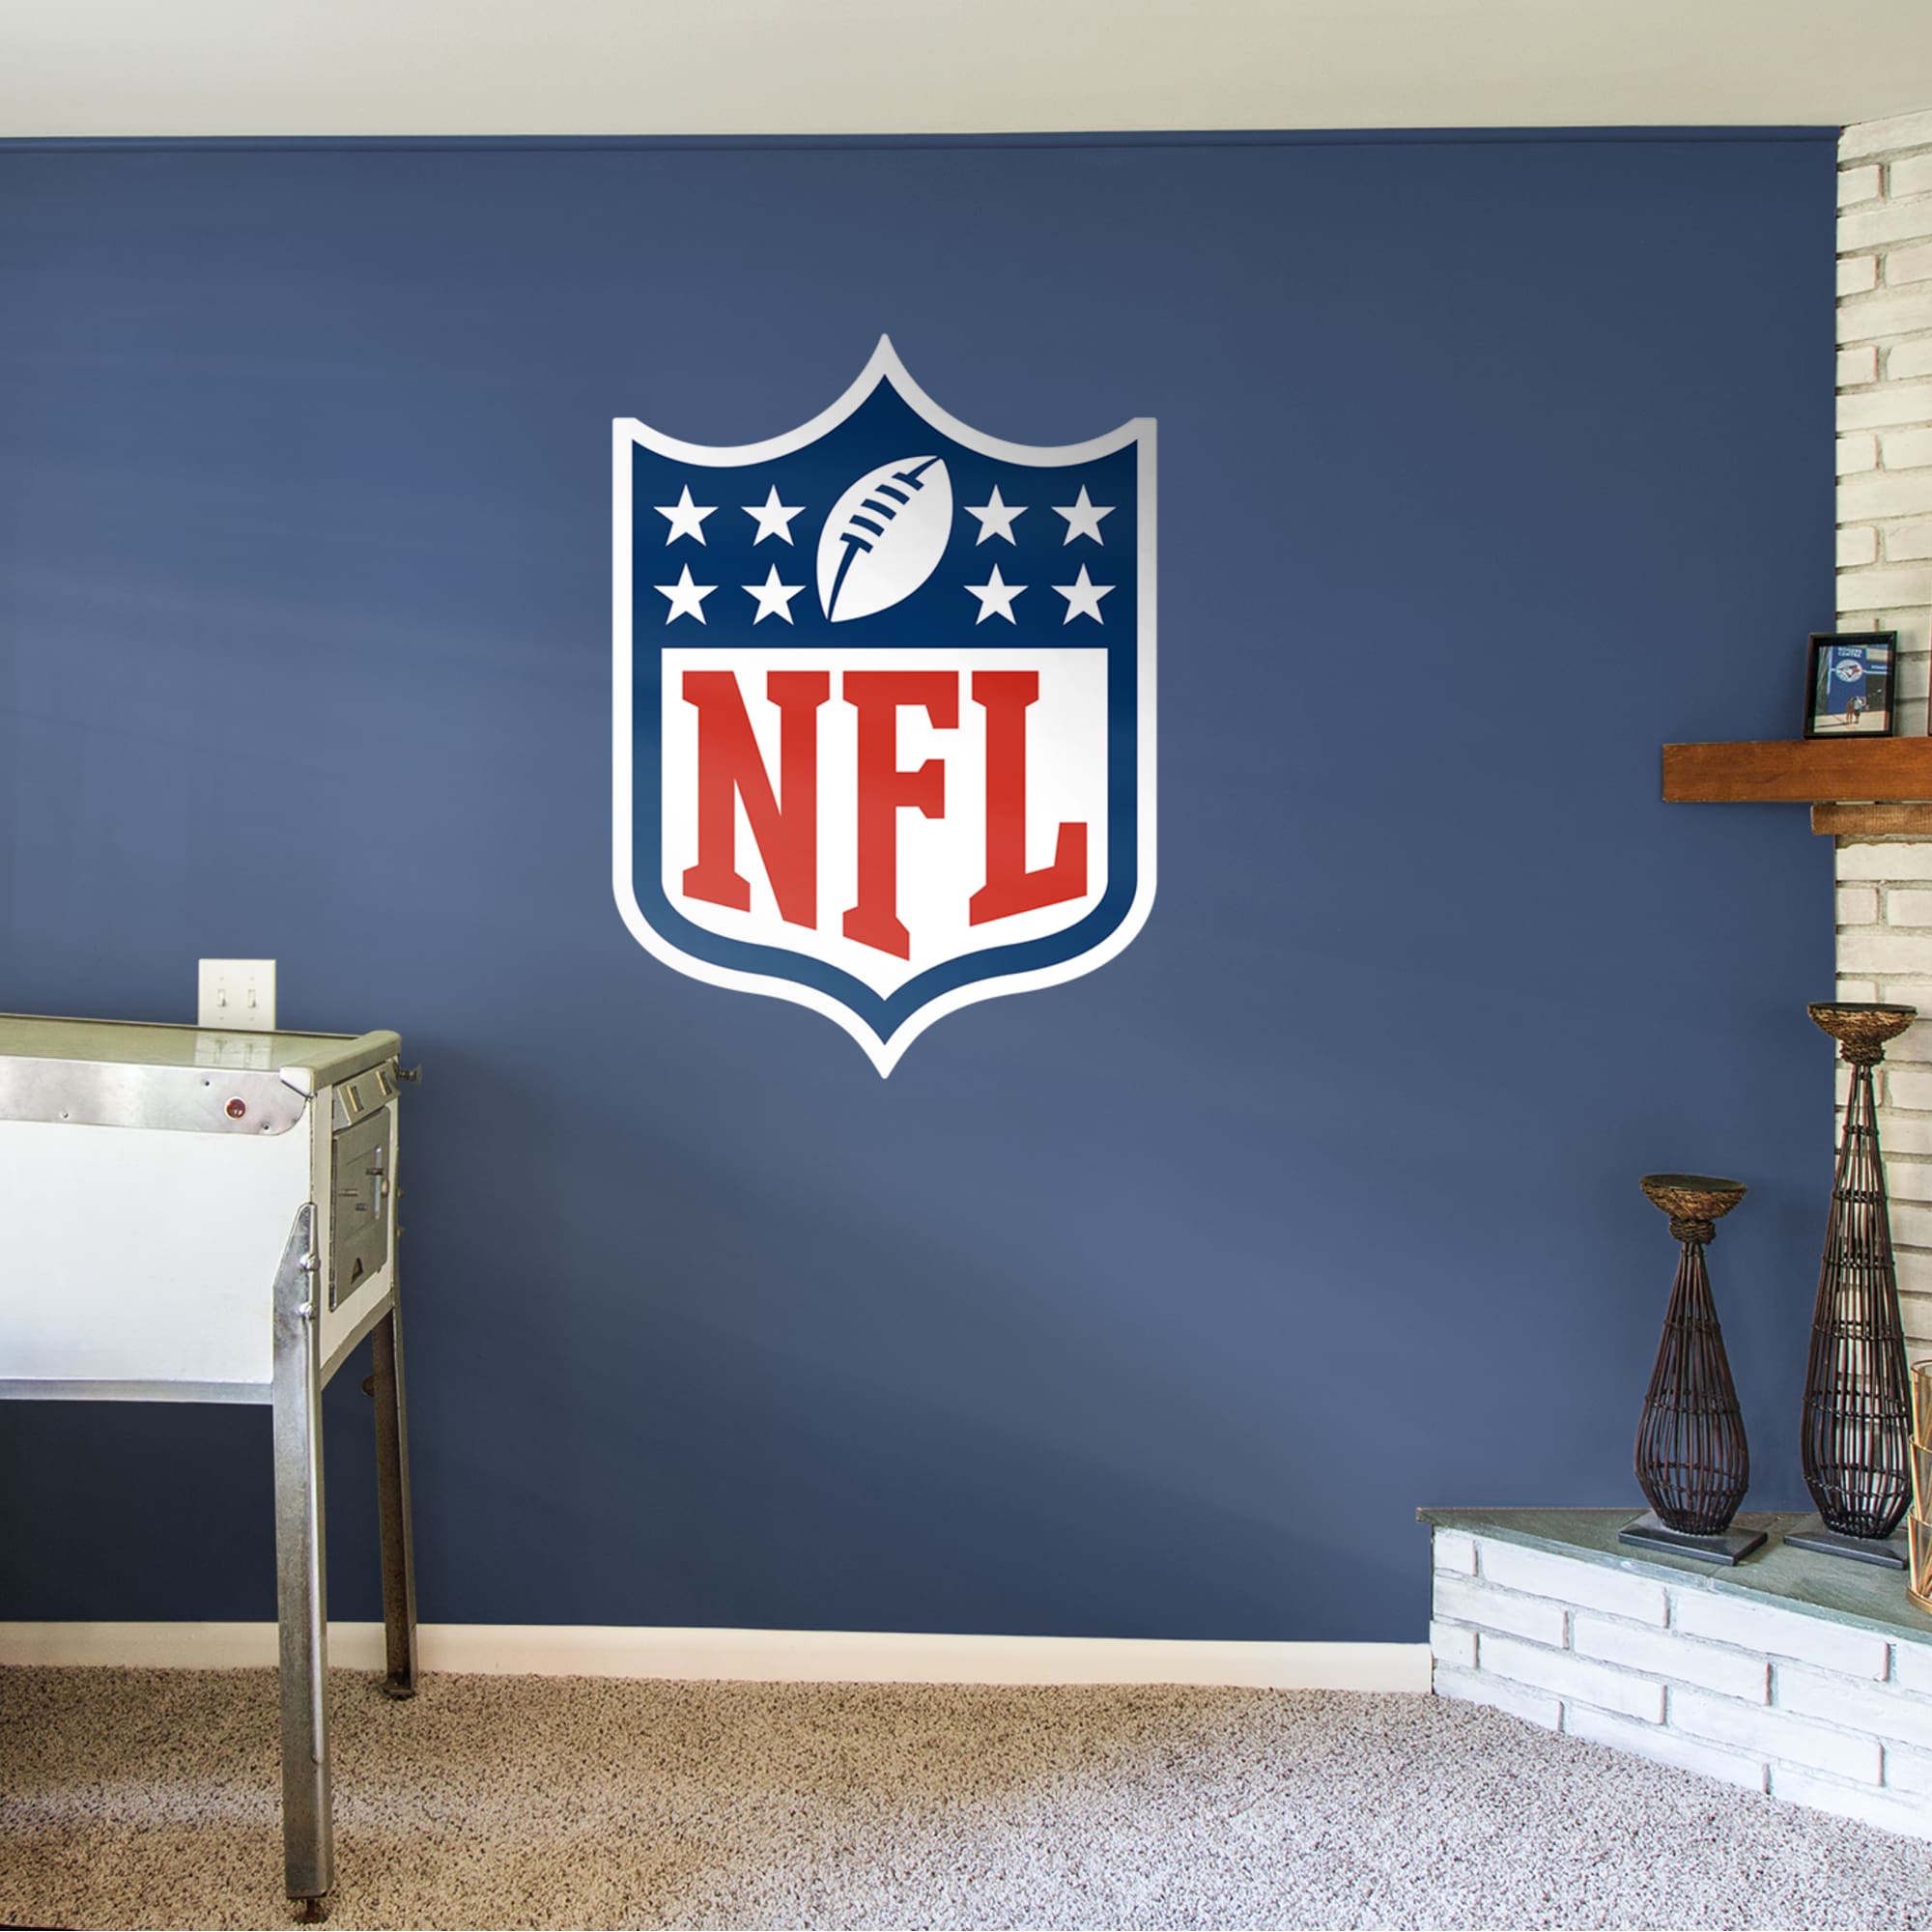 NFL: Logo - Officially Licensed NFL Removable Wall Decal 35.0"W x 48.0"H by Fathead | Vinyl